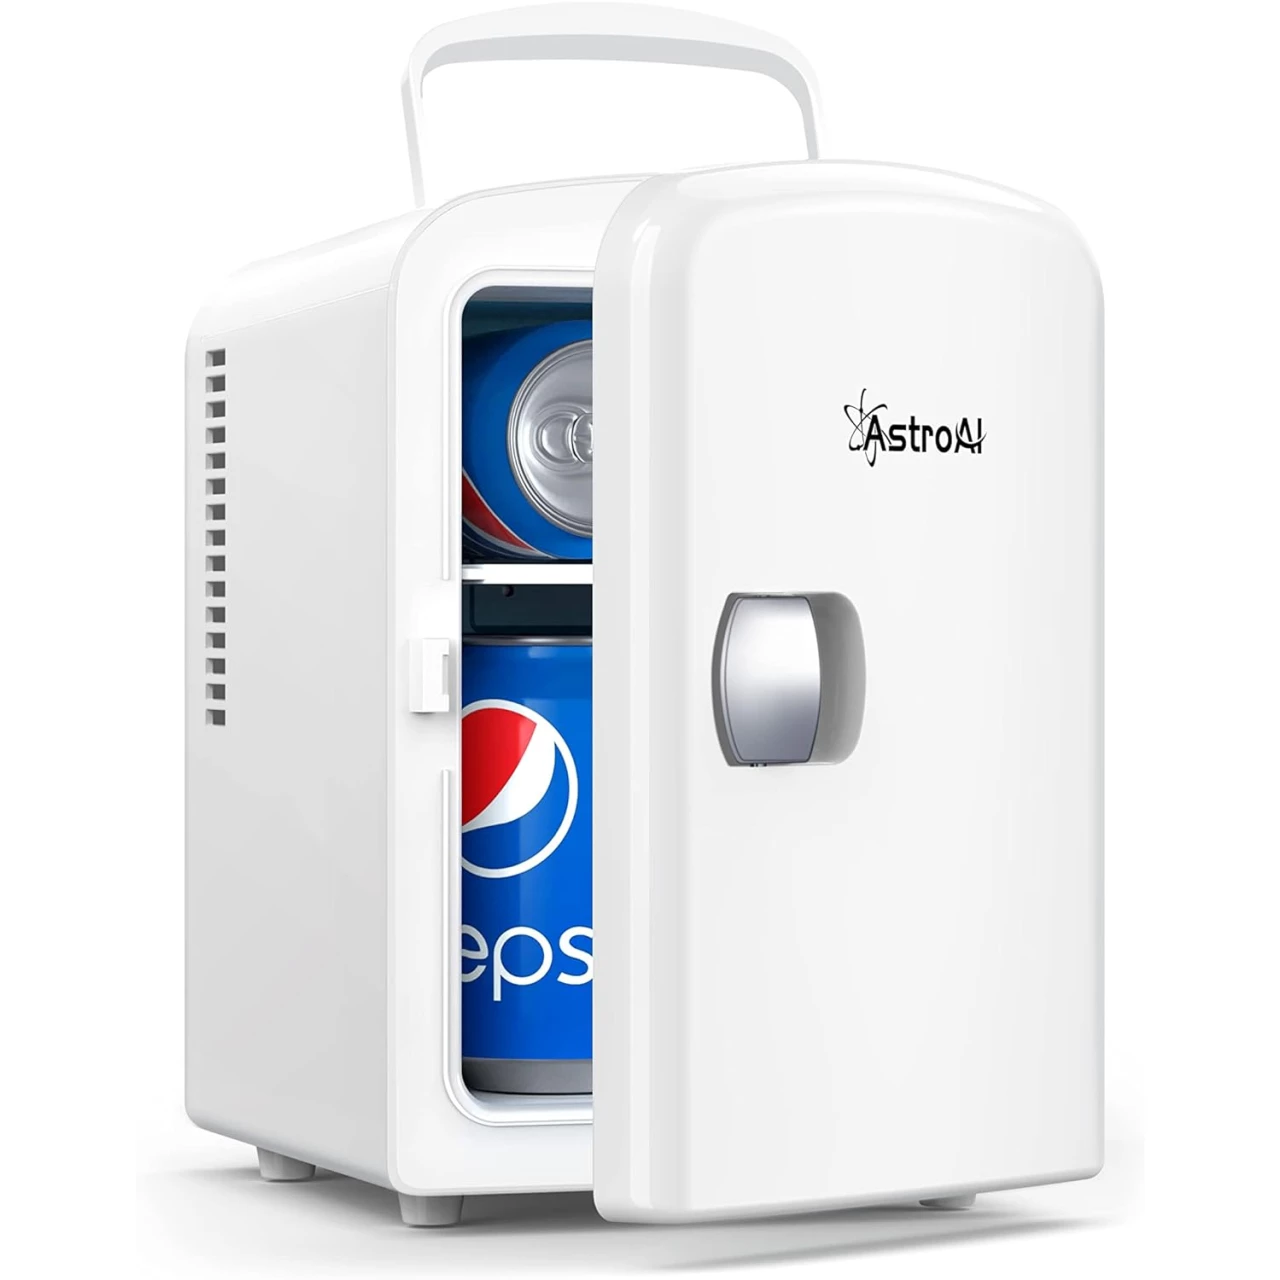 AstroAI Mini Fridge, 4 Liter/6 Can AC/DC Portable Thermoelectric Cooler and Warmer Refrigerators for Mother&rsquo;s Day Gift, Skincare, Beverage, Home, Office and Car, ETL Listed (White)